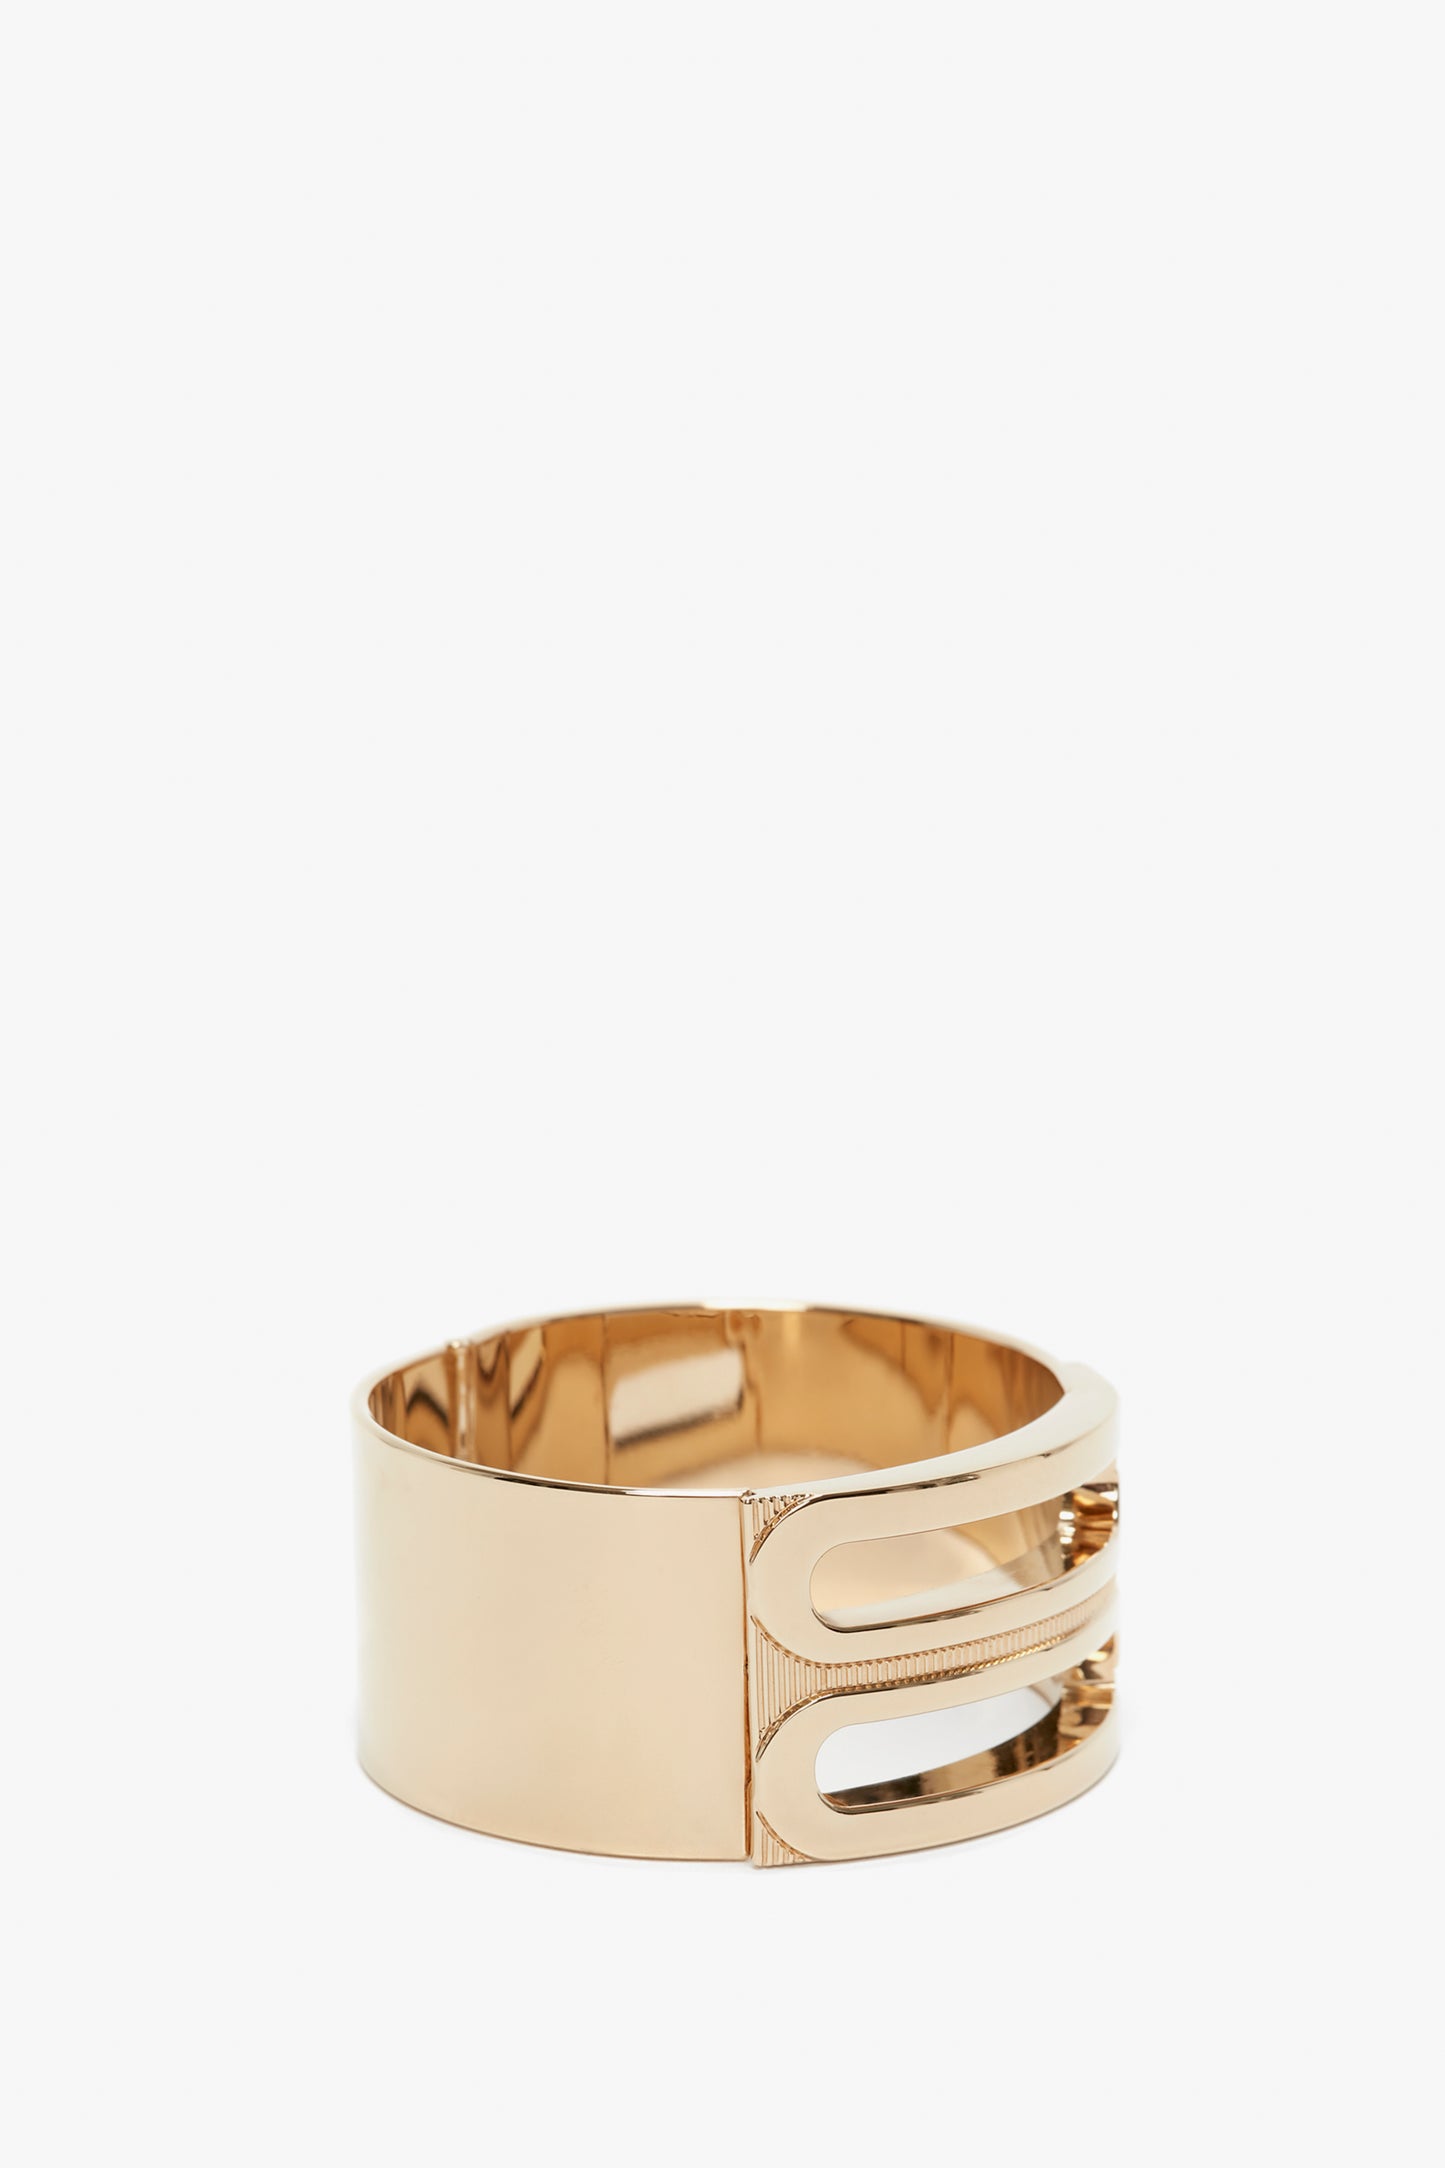 Exclusive Frame Bracelet In Gold by Victoria Beckham, with a sleek design and a clasp detail, isolated on a white background.